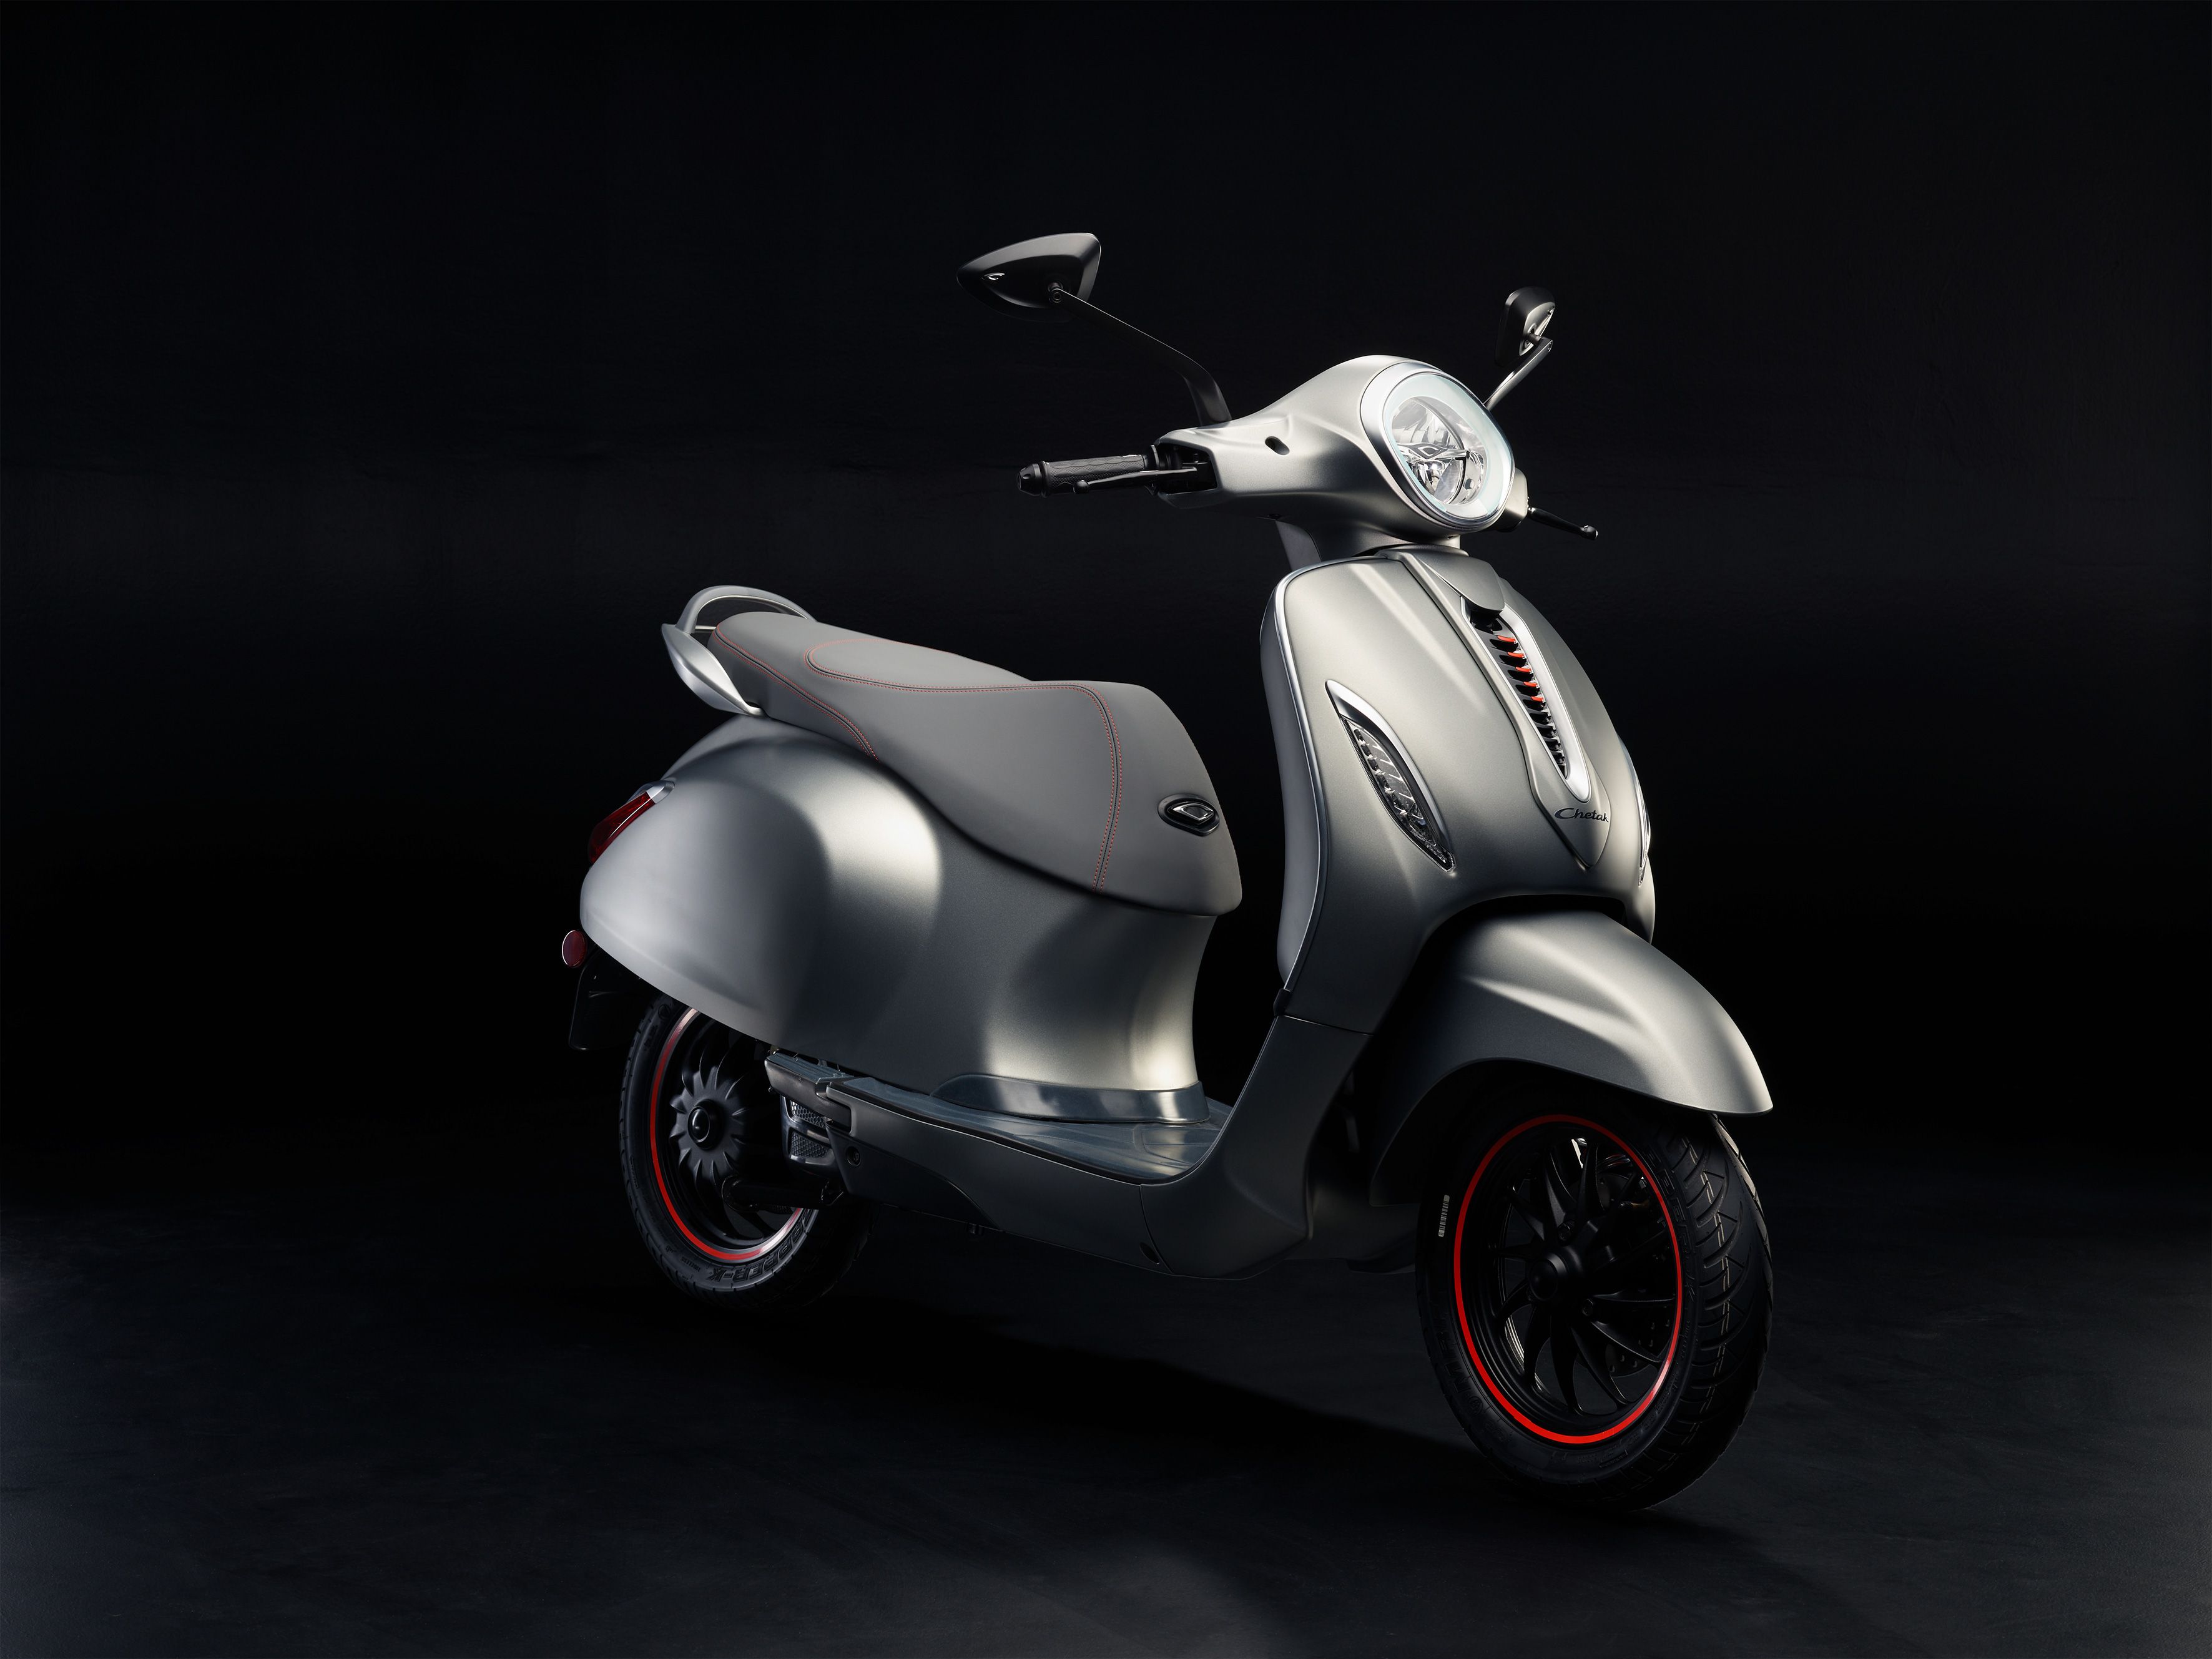 Bajaj Chetak electric scooter unvelied; deliveries begin in January 2020